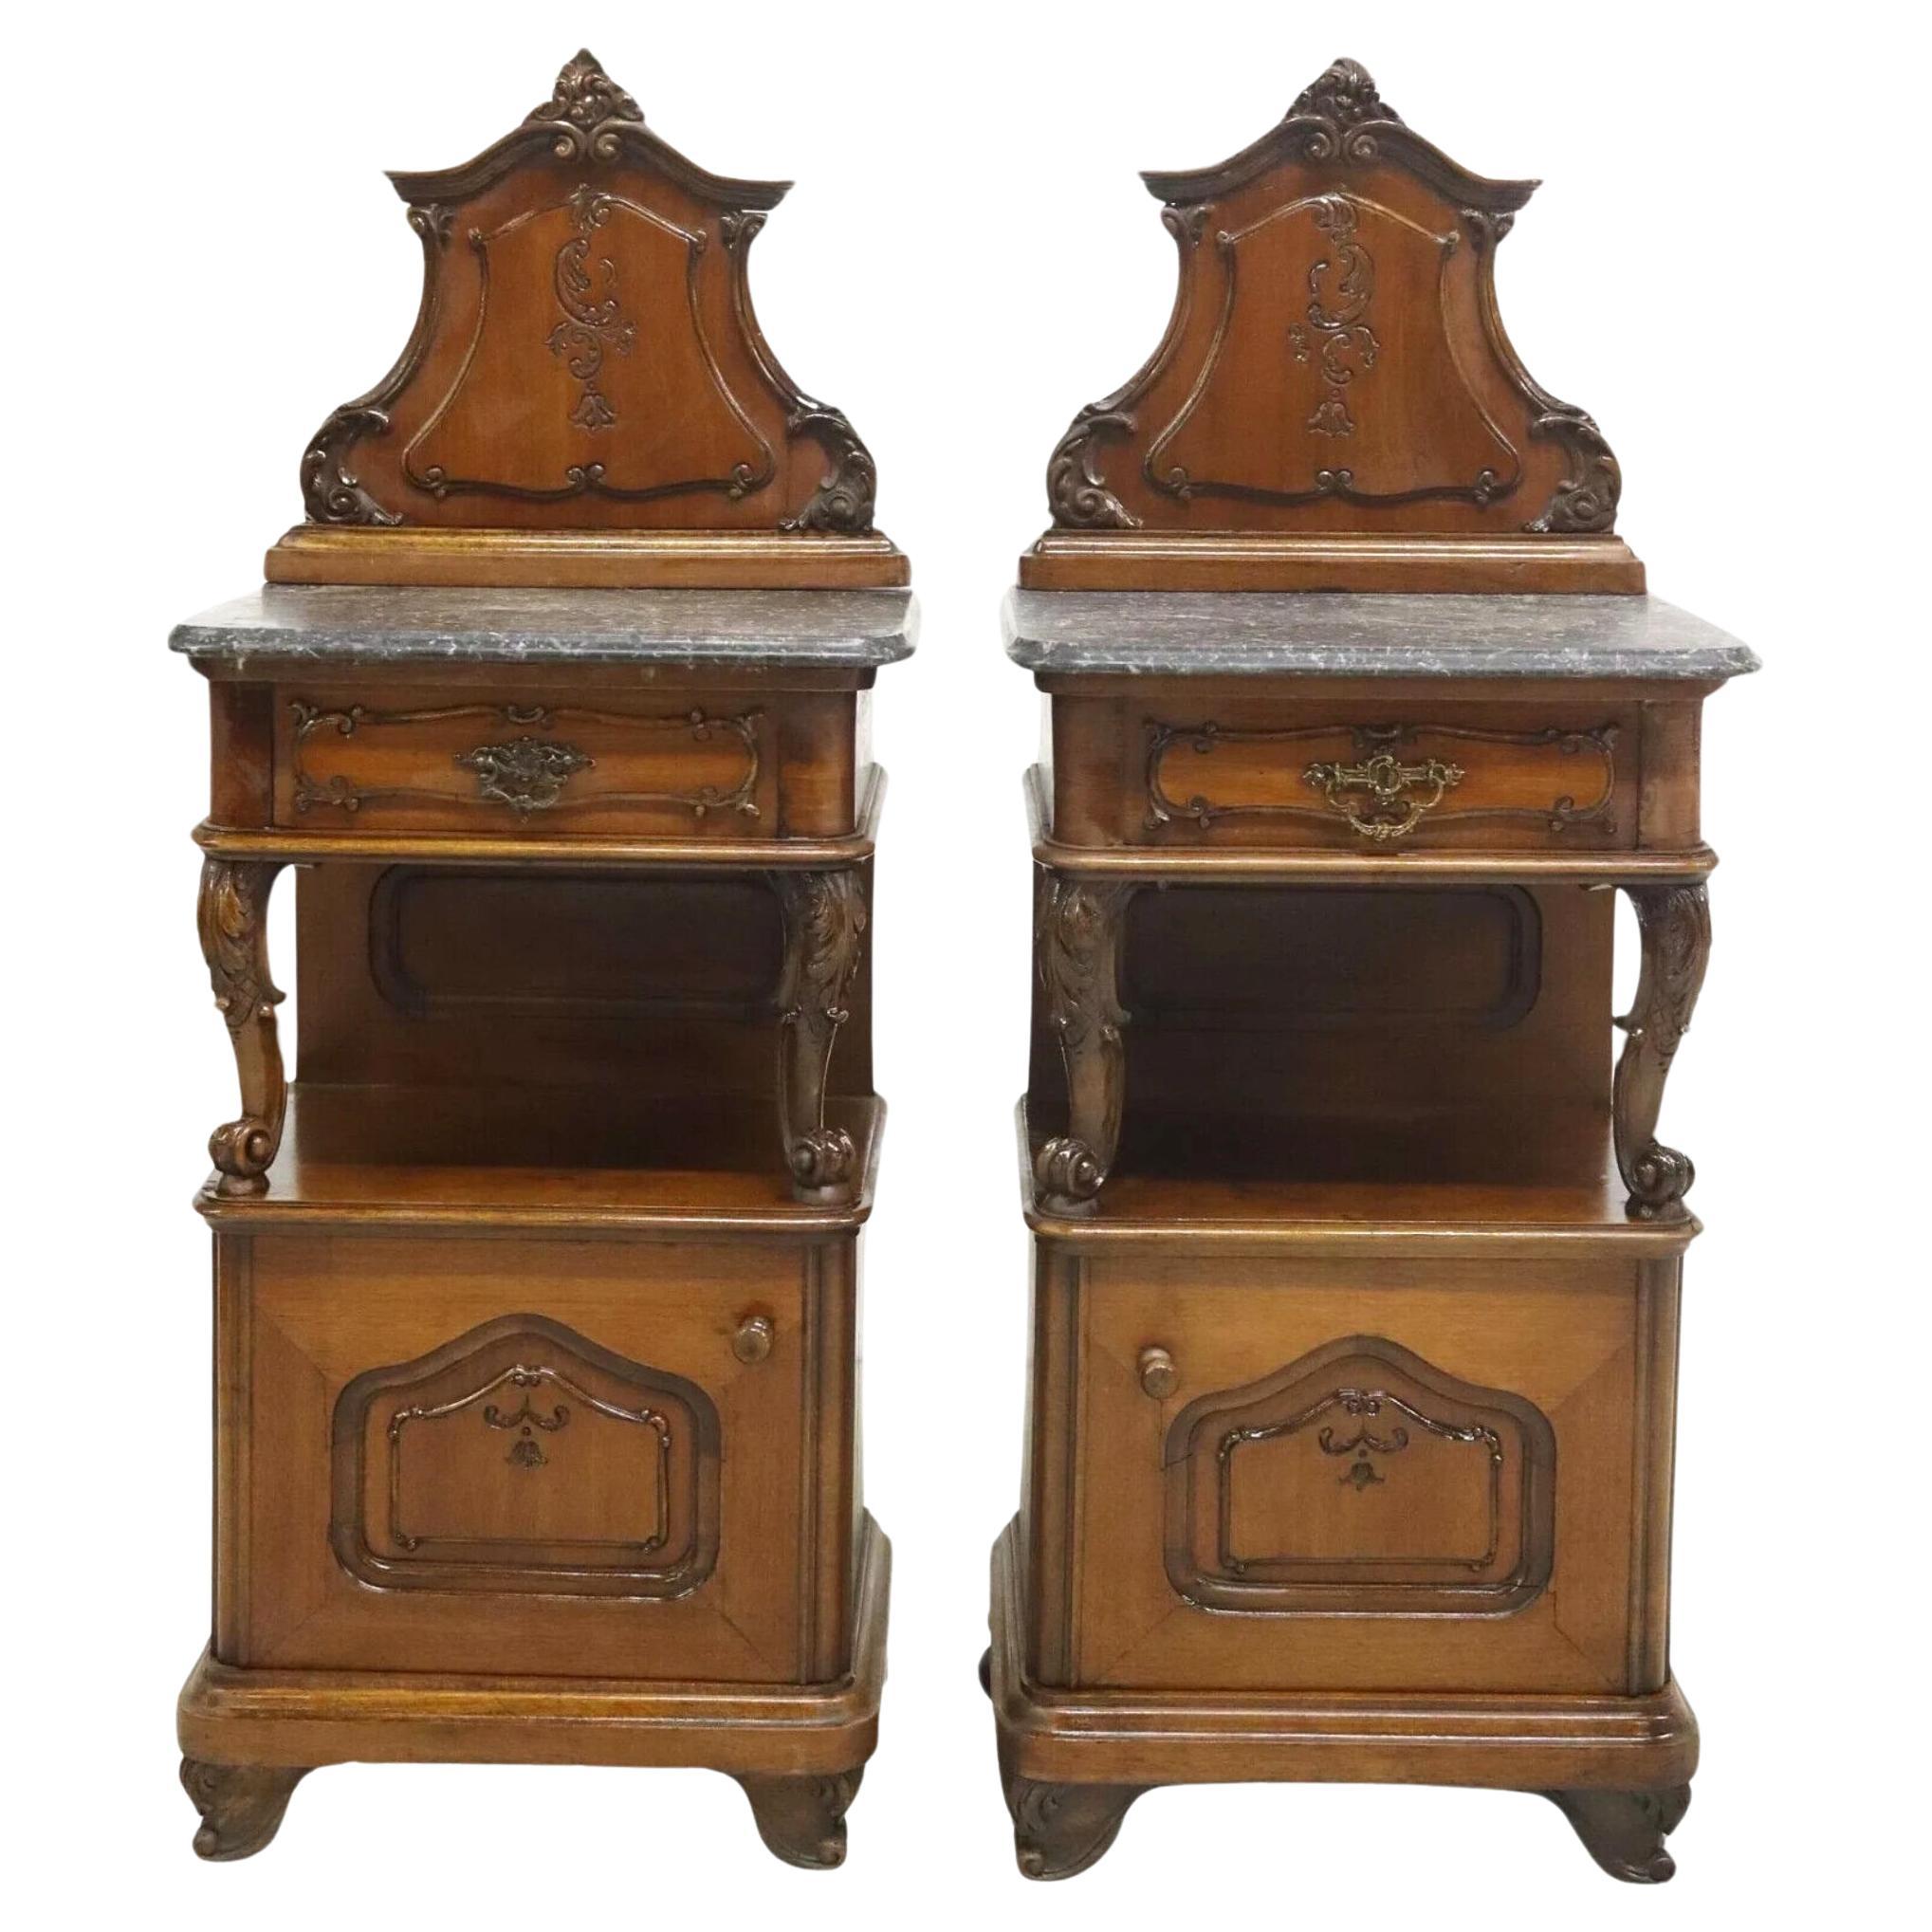 1800's Antique Rococo Style, Marble-Top, Mahogany, Foliat, NIghtstands, Set of 2!!

Gorgeous Antique Nightstands (2) Pair, Rococo Style, Marble-Top, Mahogany, Foliate, 19th Century, 1800s!

This is a pair of antique nightstands in Rococo style, made